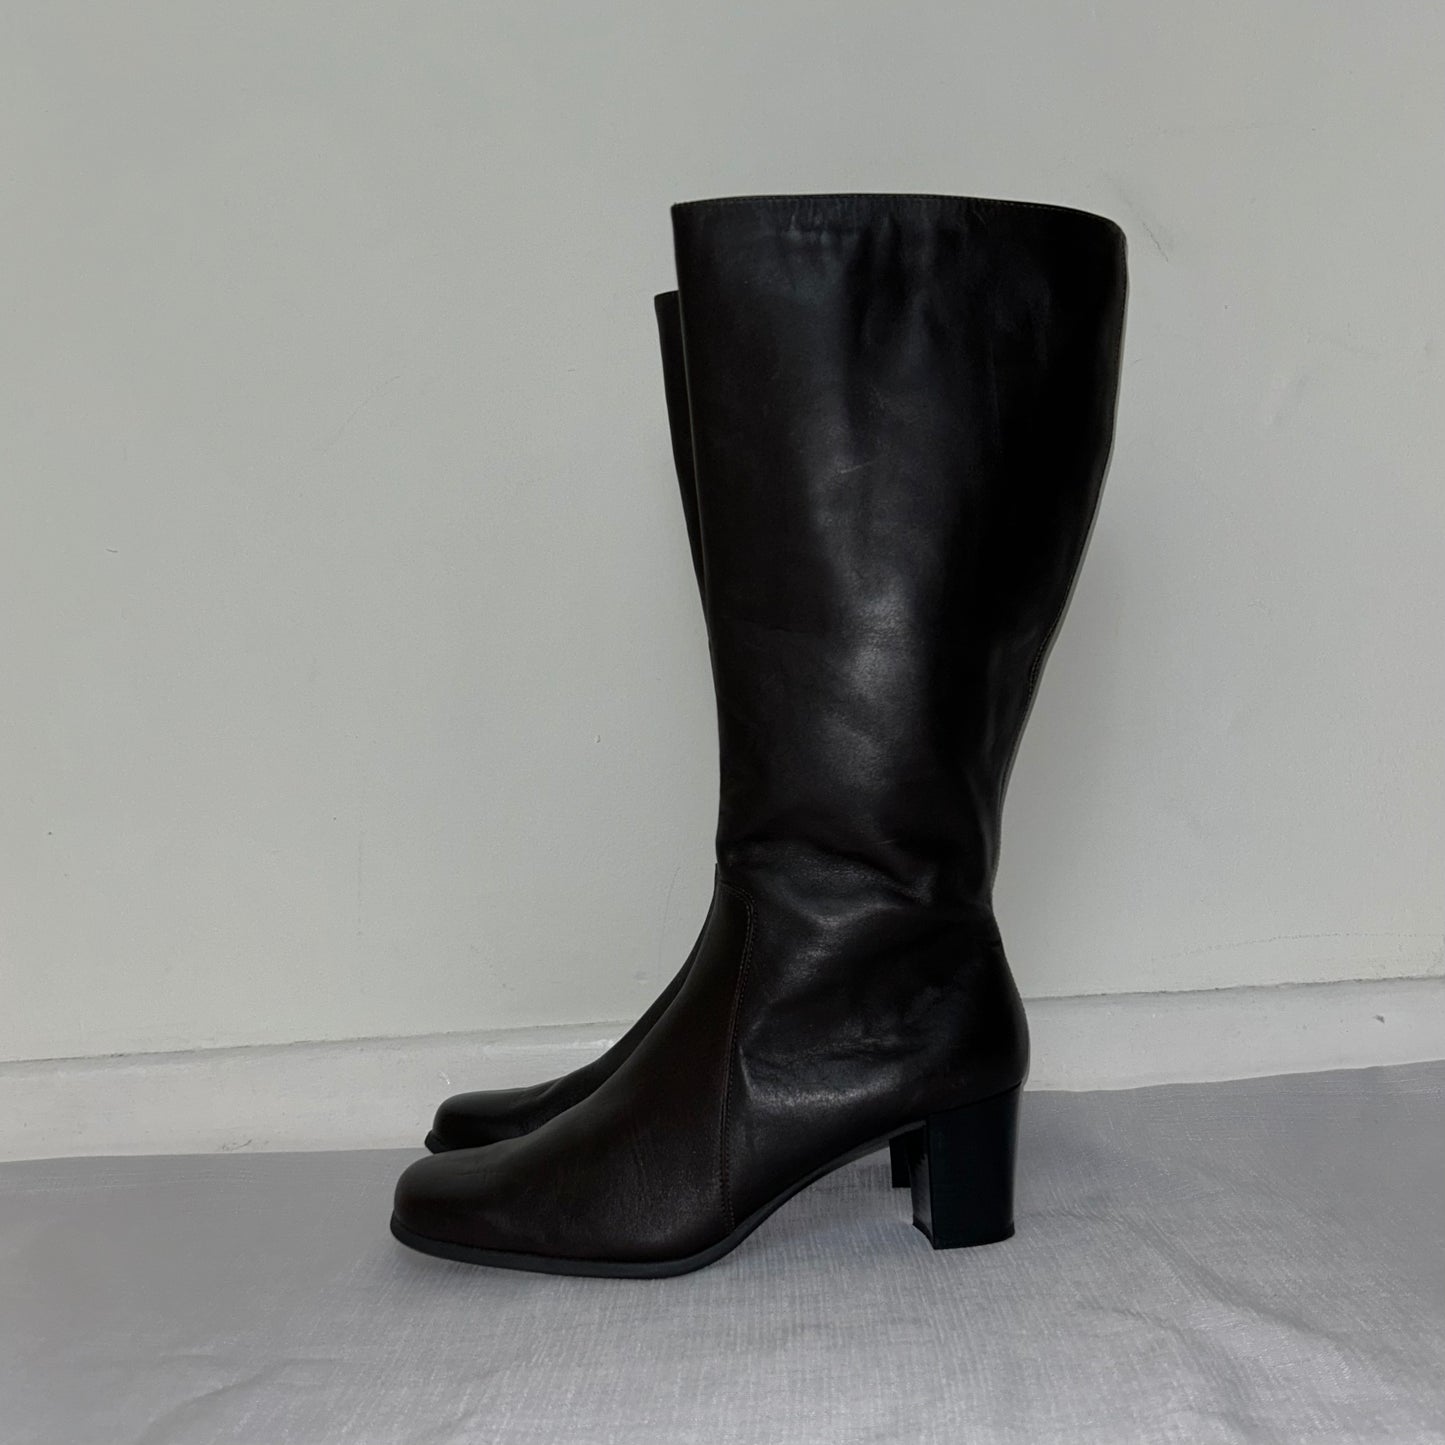 dark brown leather knee high boots shown on a white background